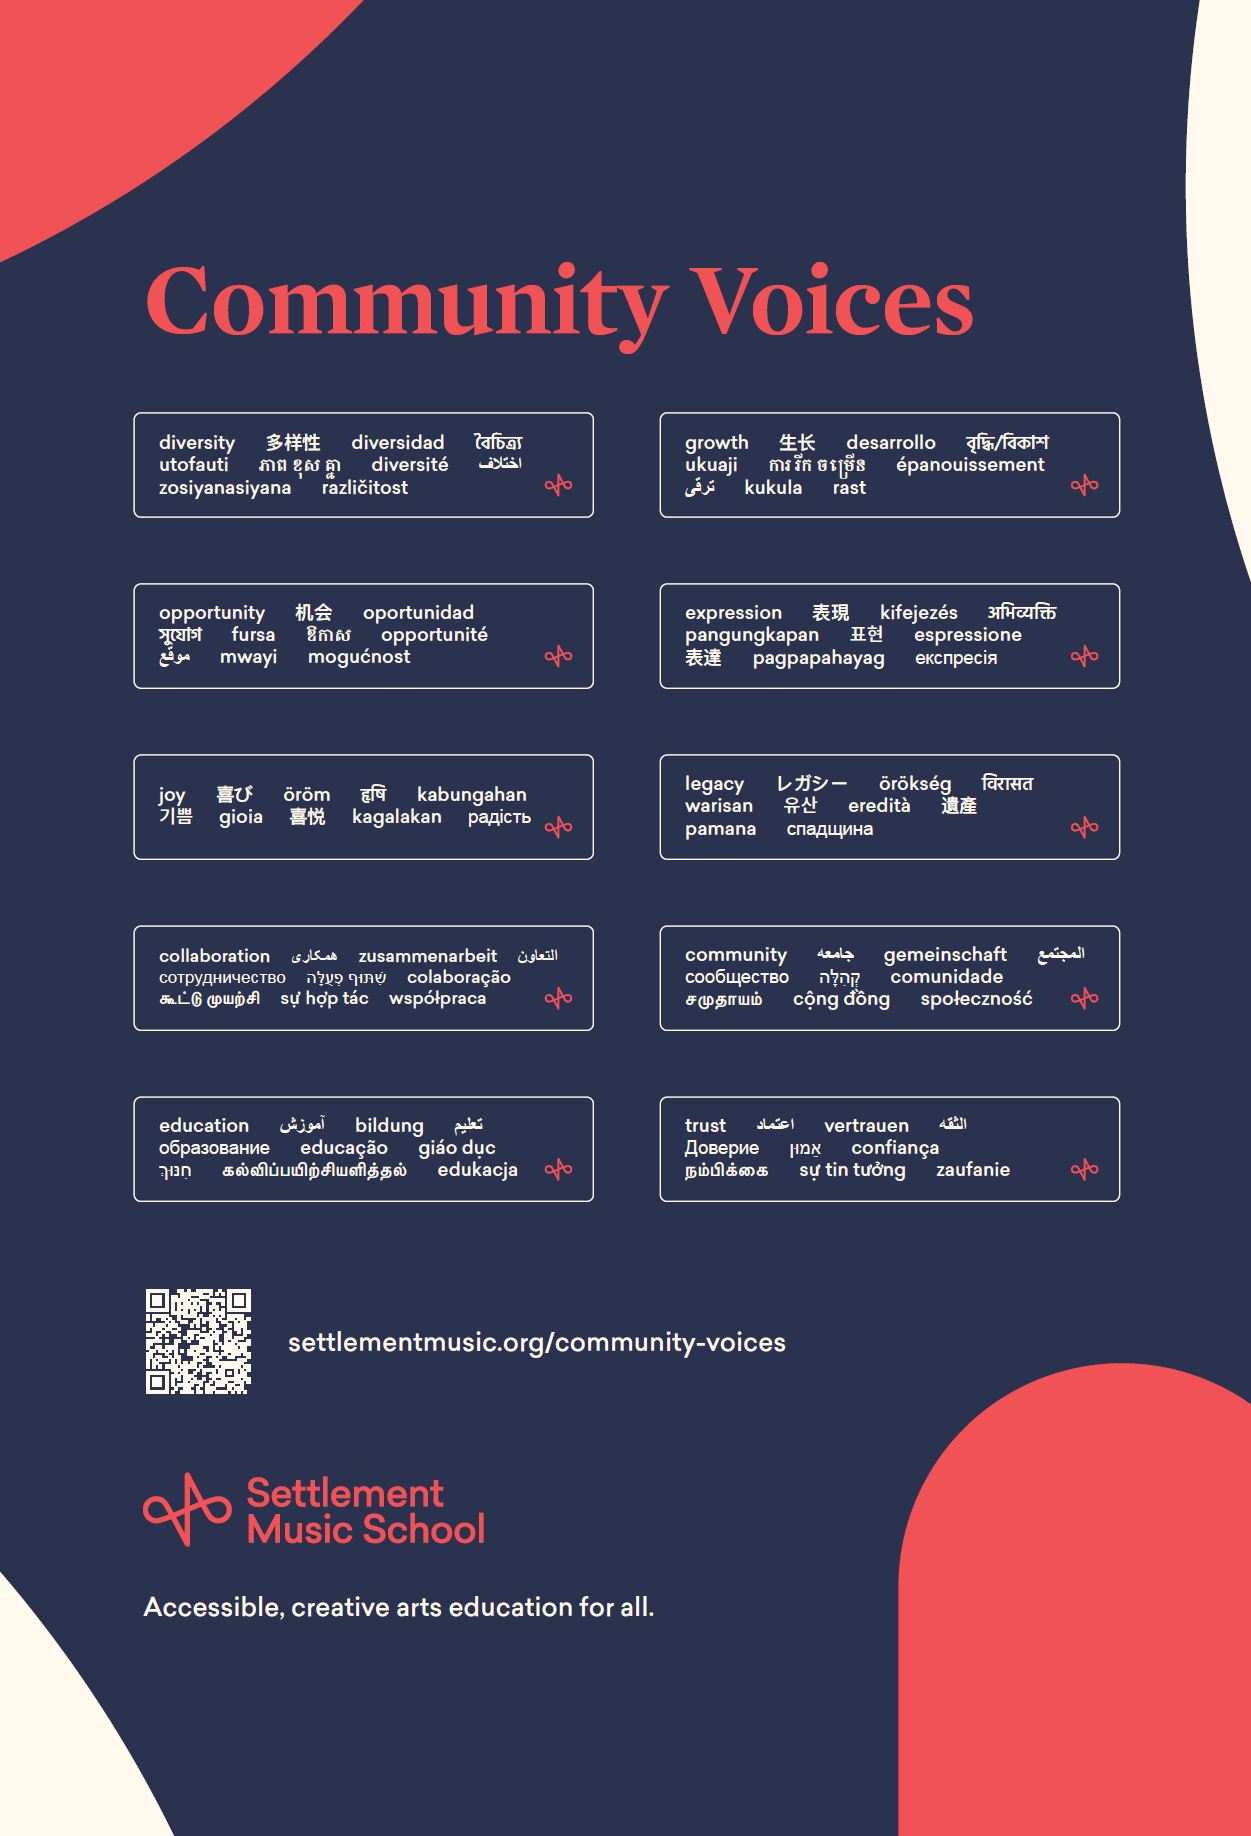 Community Voices Plaques: Collaboration, Community, Diversity, Education, Expression, Growth, Legacy, Joy, Opportunity, and Trust